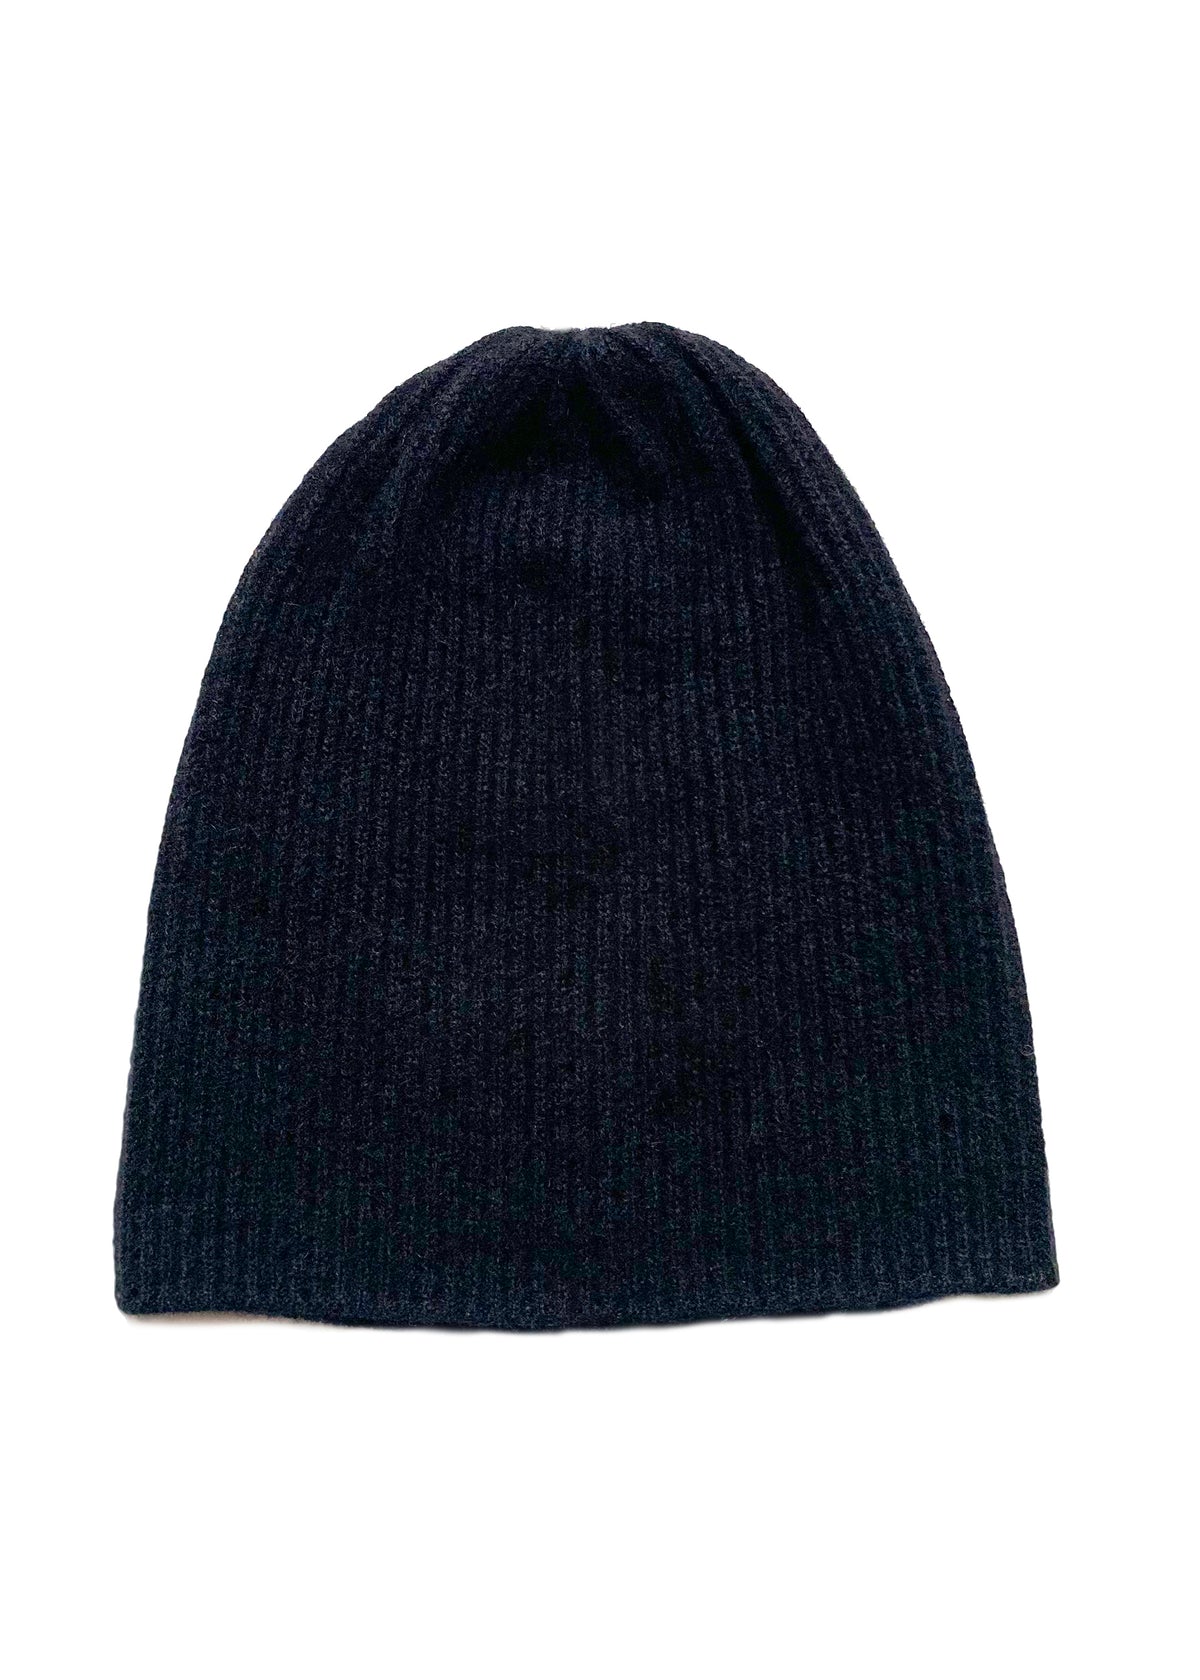 Recycled Cashmere Beanie | Black